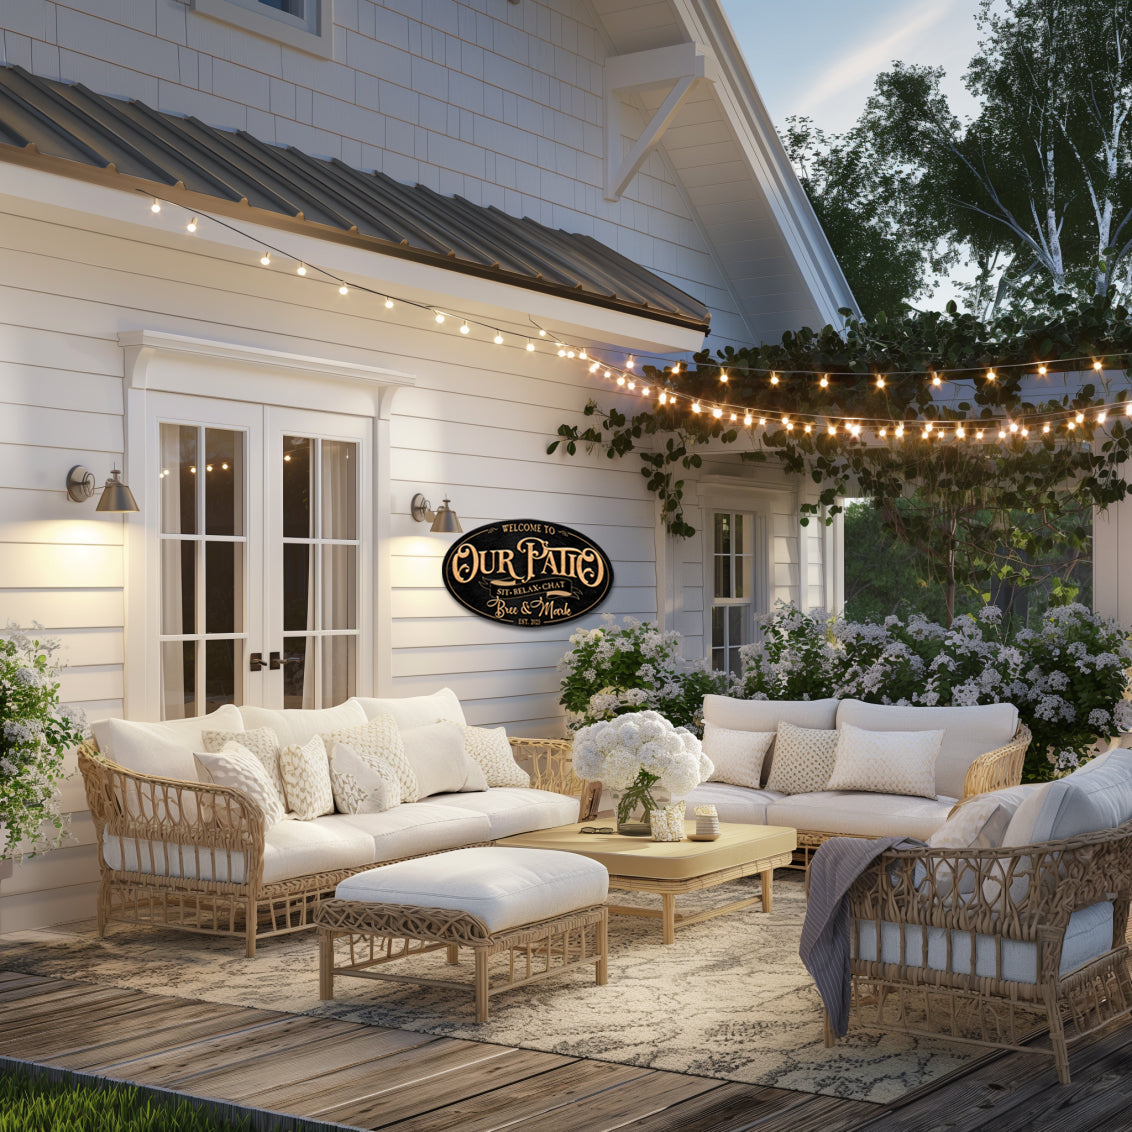 10 Ways to Create a Cozy and Comfortable Patio Oasis